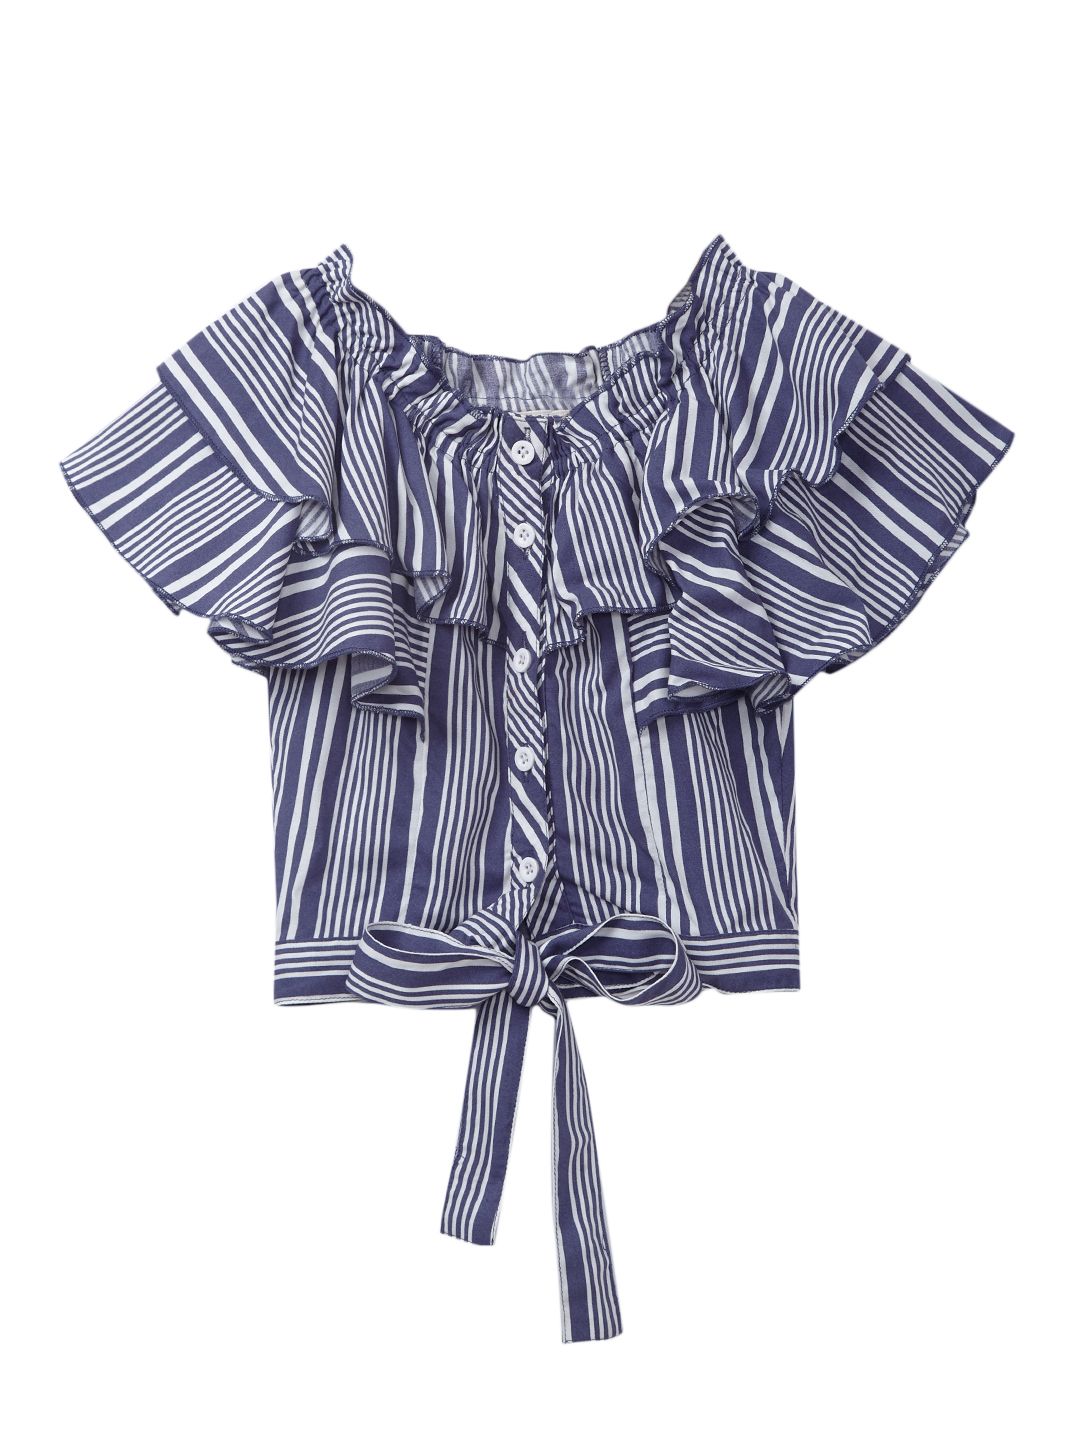 Girls Tie Knot Rayon Striped Fashion Woven Top,Blue